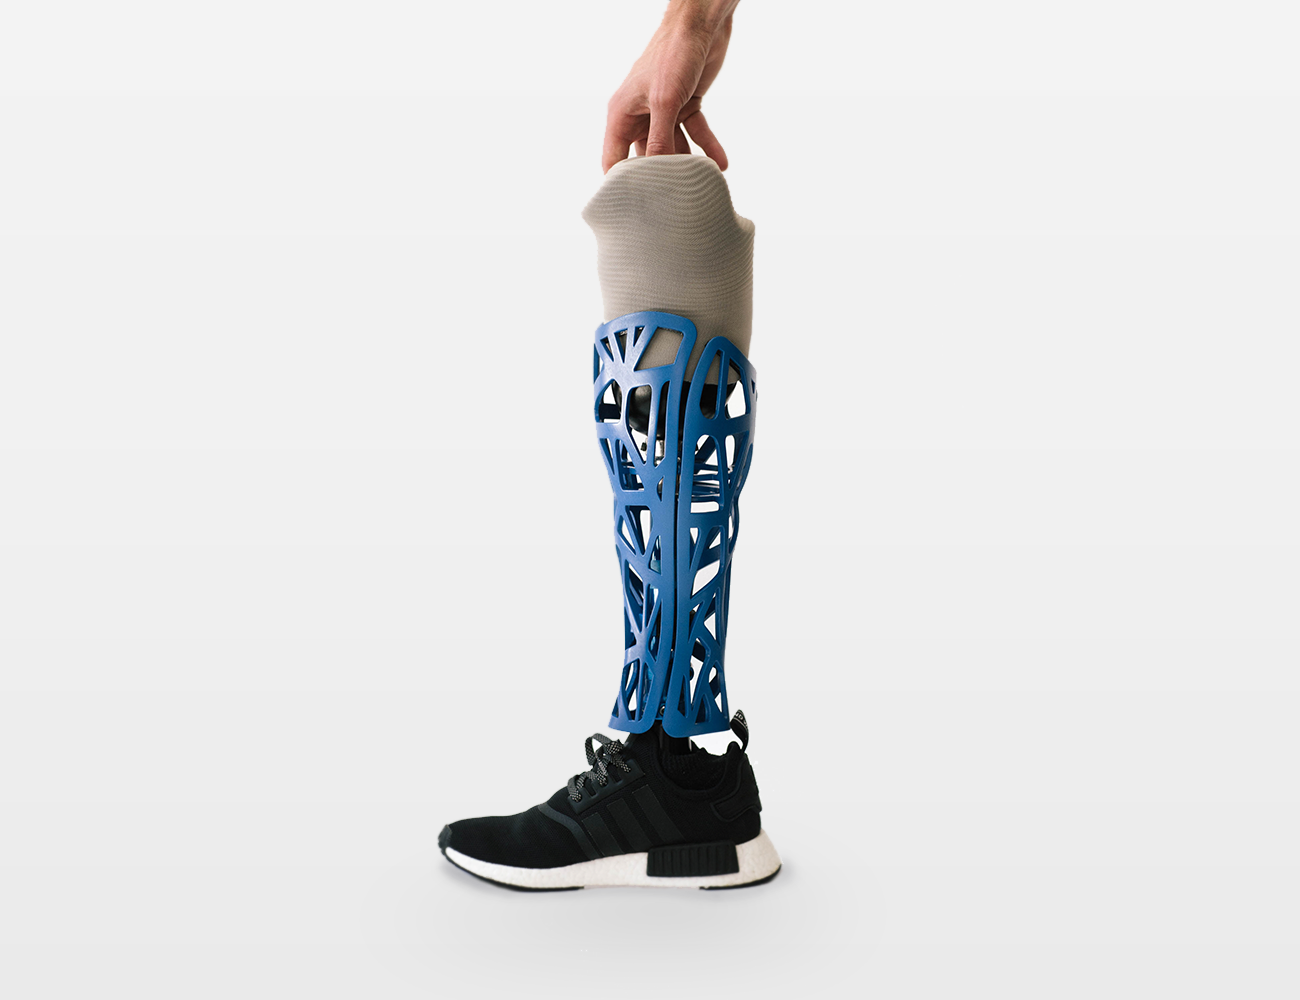 Form Prosthetic Covers (Copy)